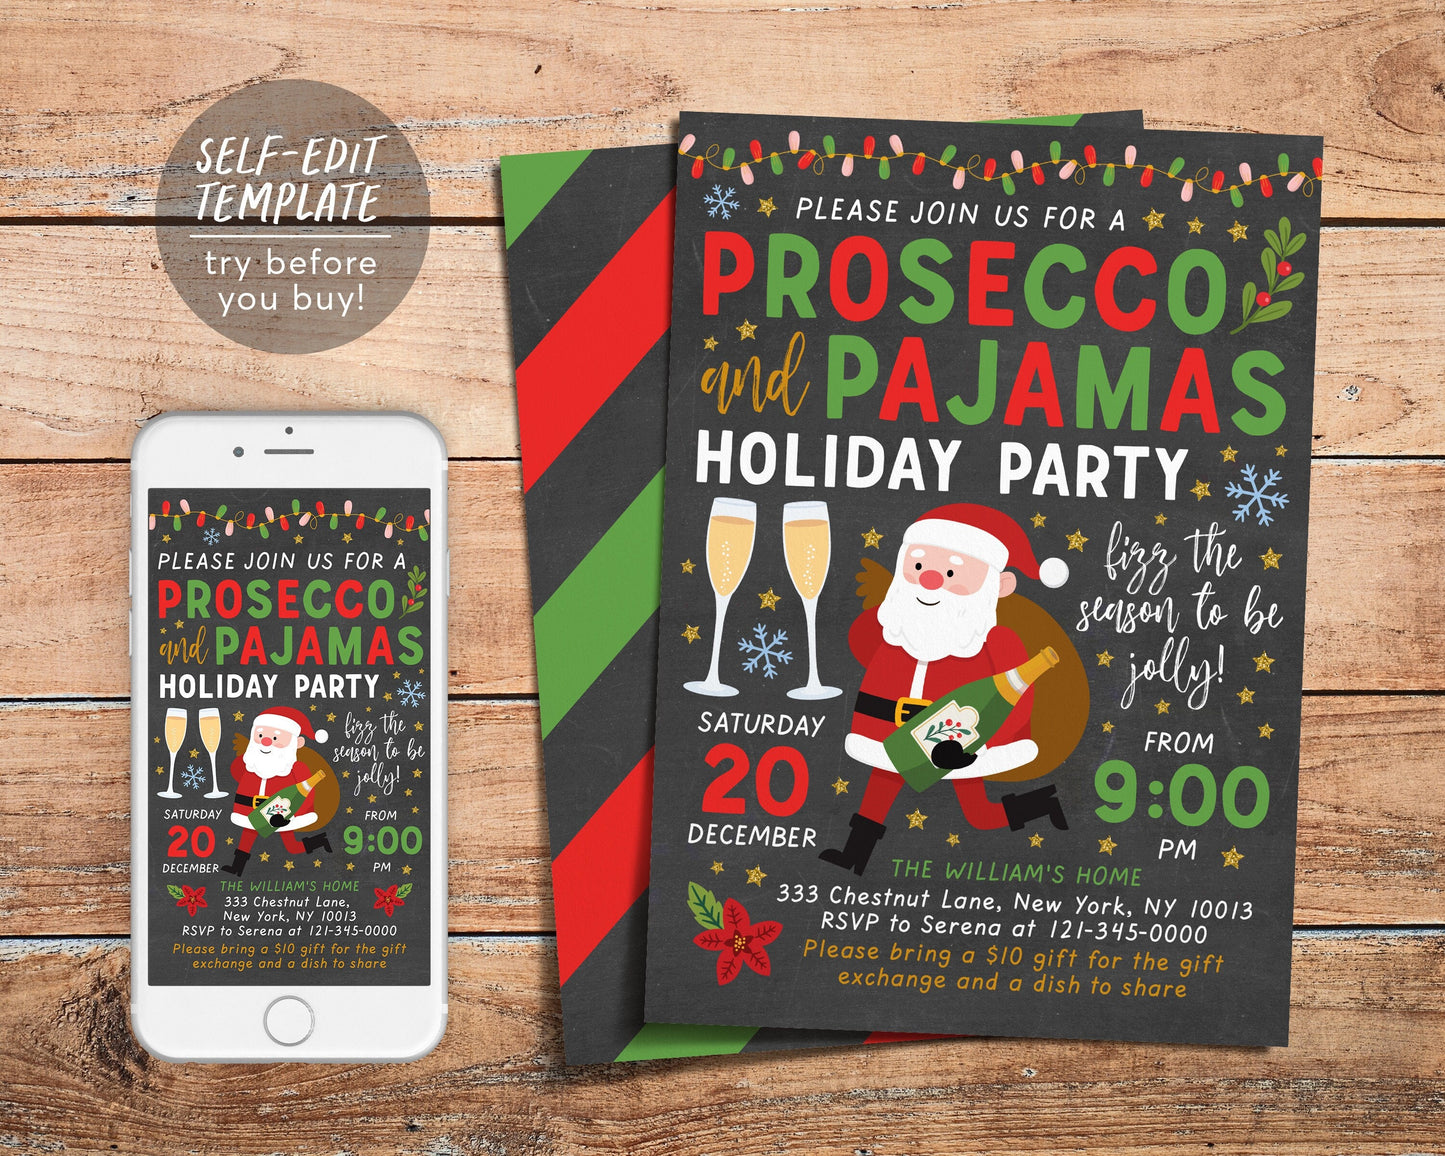 Pajamas And Prosecco Christmas Invitation Editable Template, PJs And Prosecco Holiday Cocktail Party Plaid Invite Evite, Instant Download